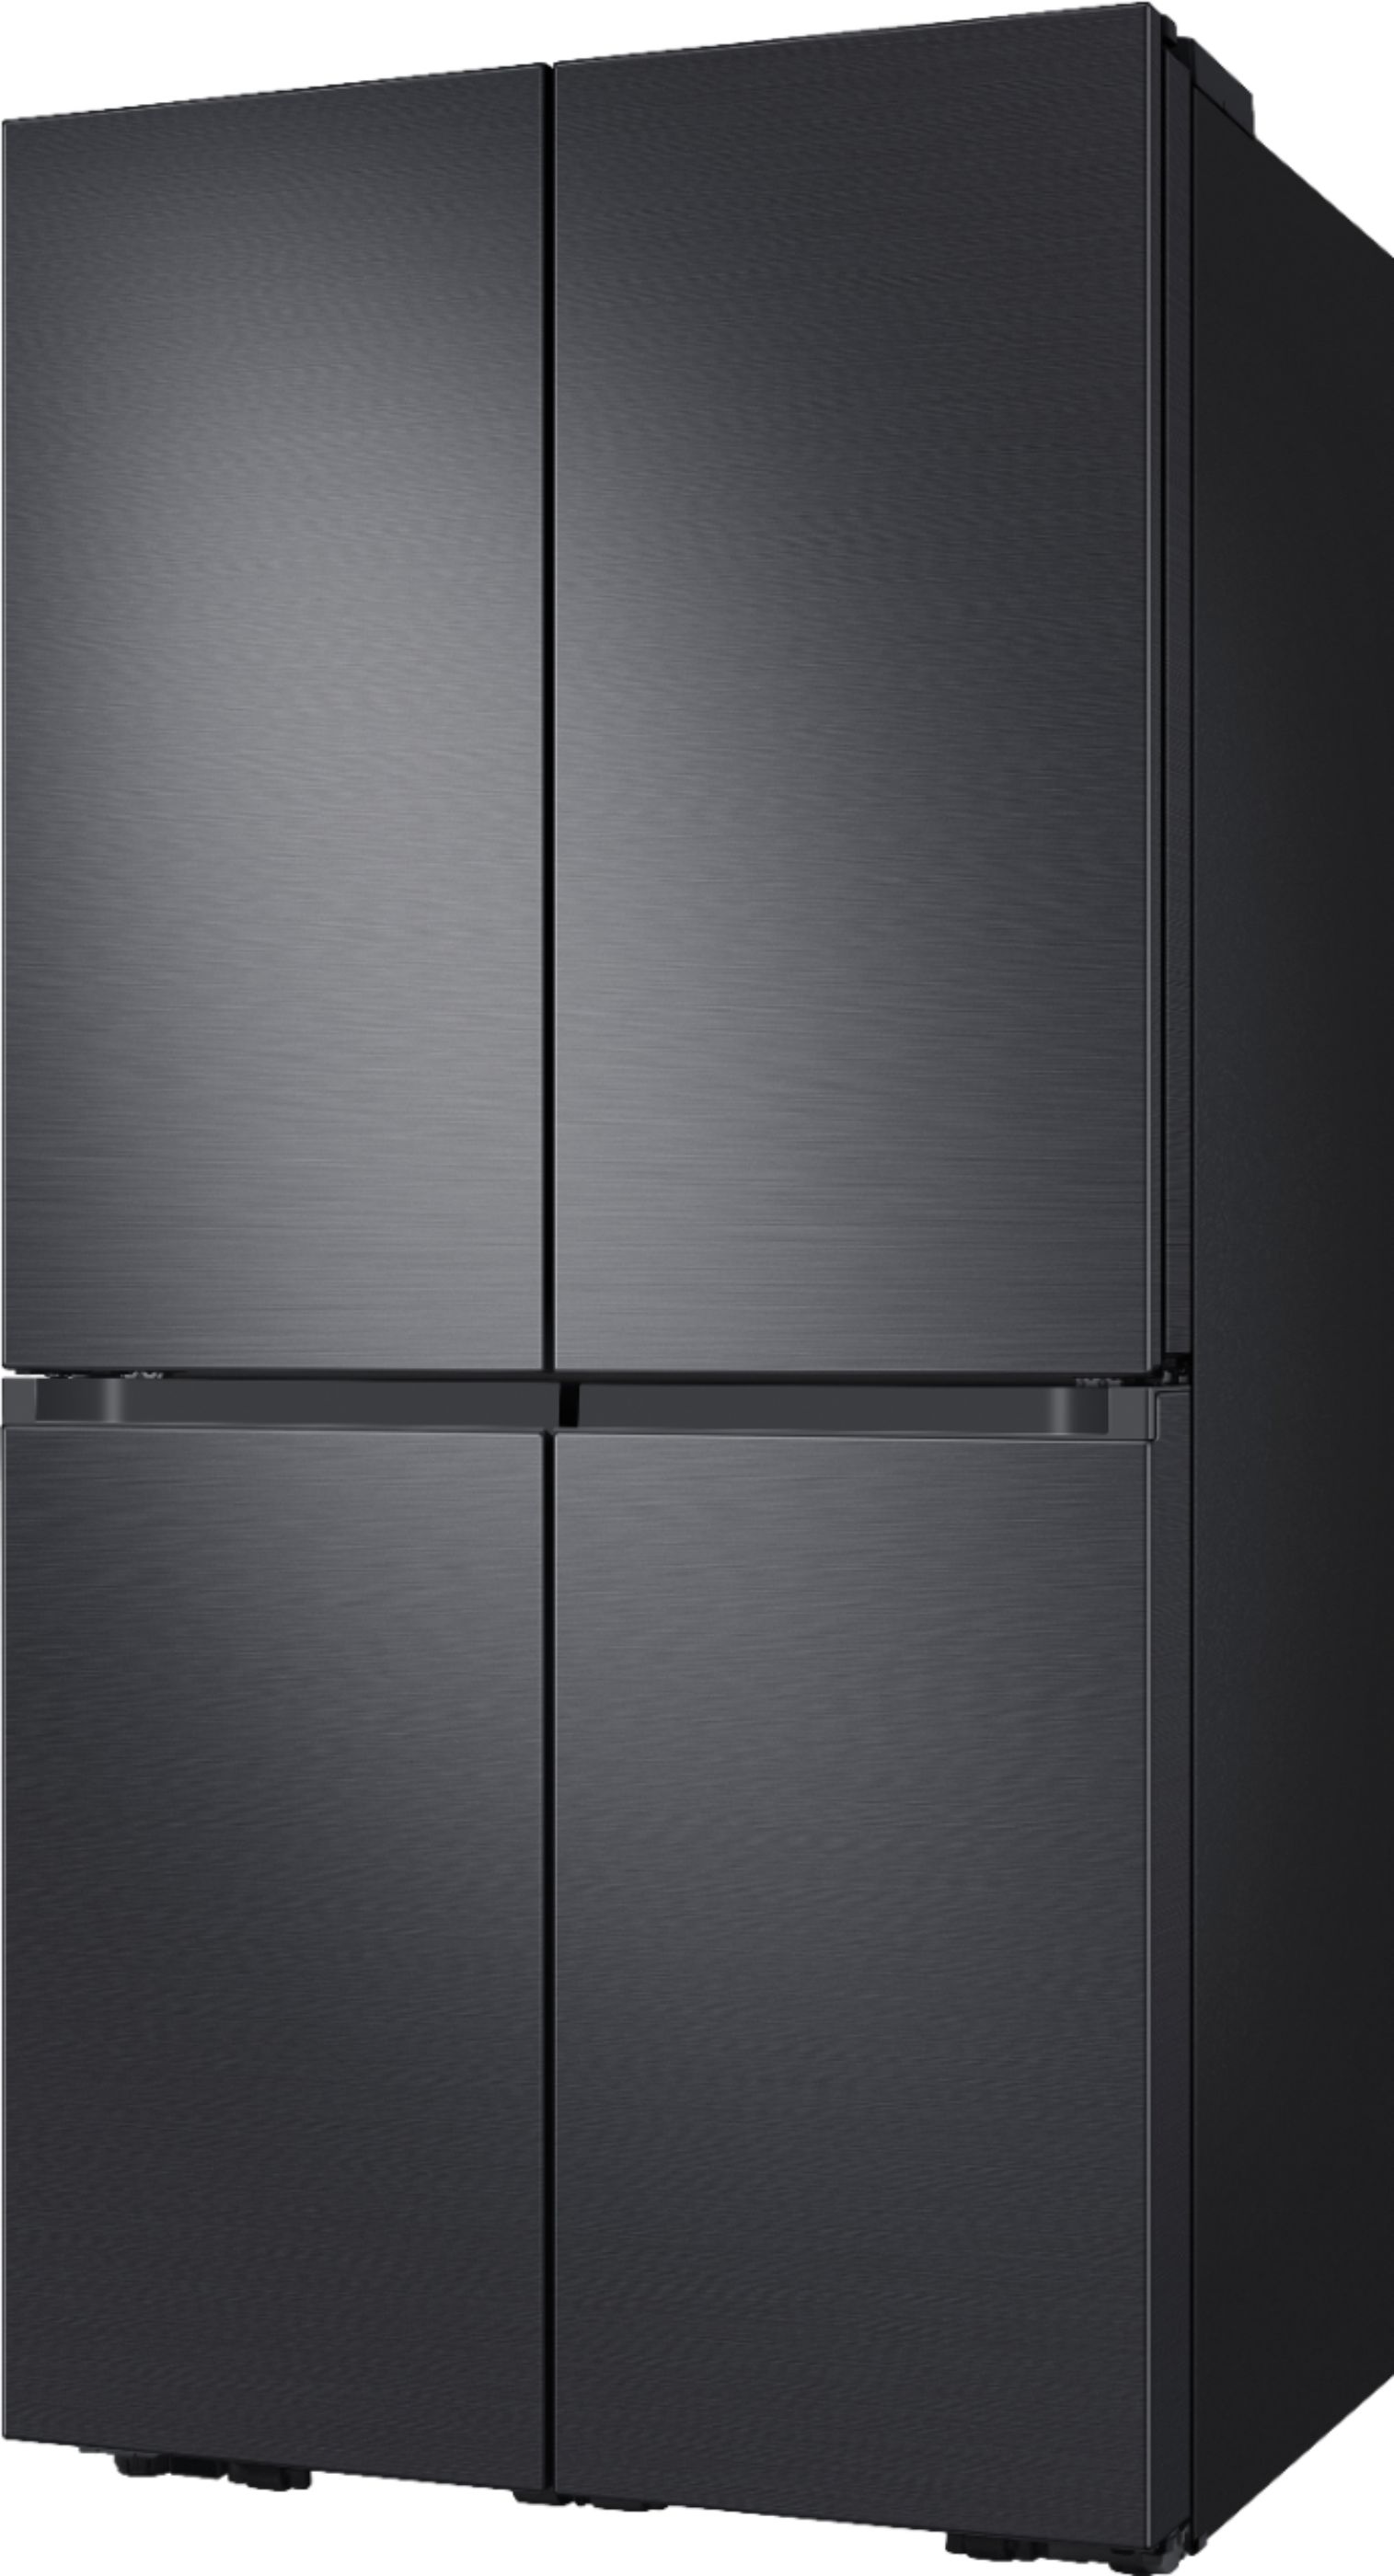 Angle View: Samsung - BESPOKE 23 cu. ft. 4-Door Flex French Door Counter Depth Refrigerator with WiFi and Customizable Panel Colors - Navy glass